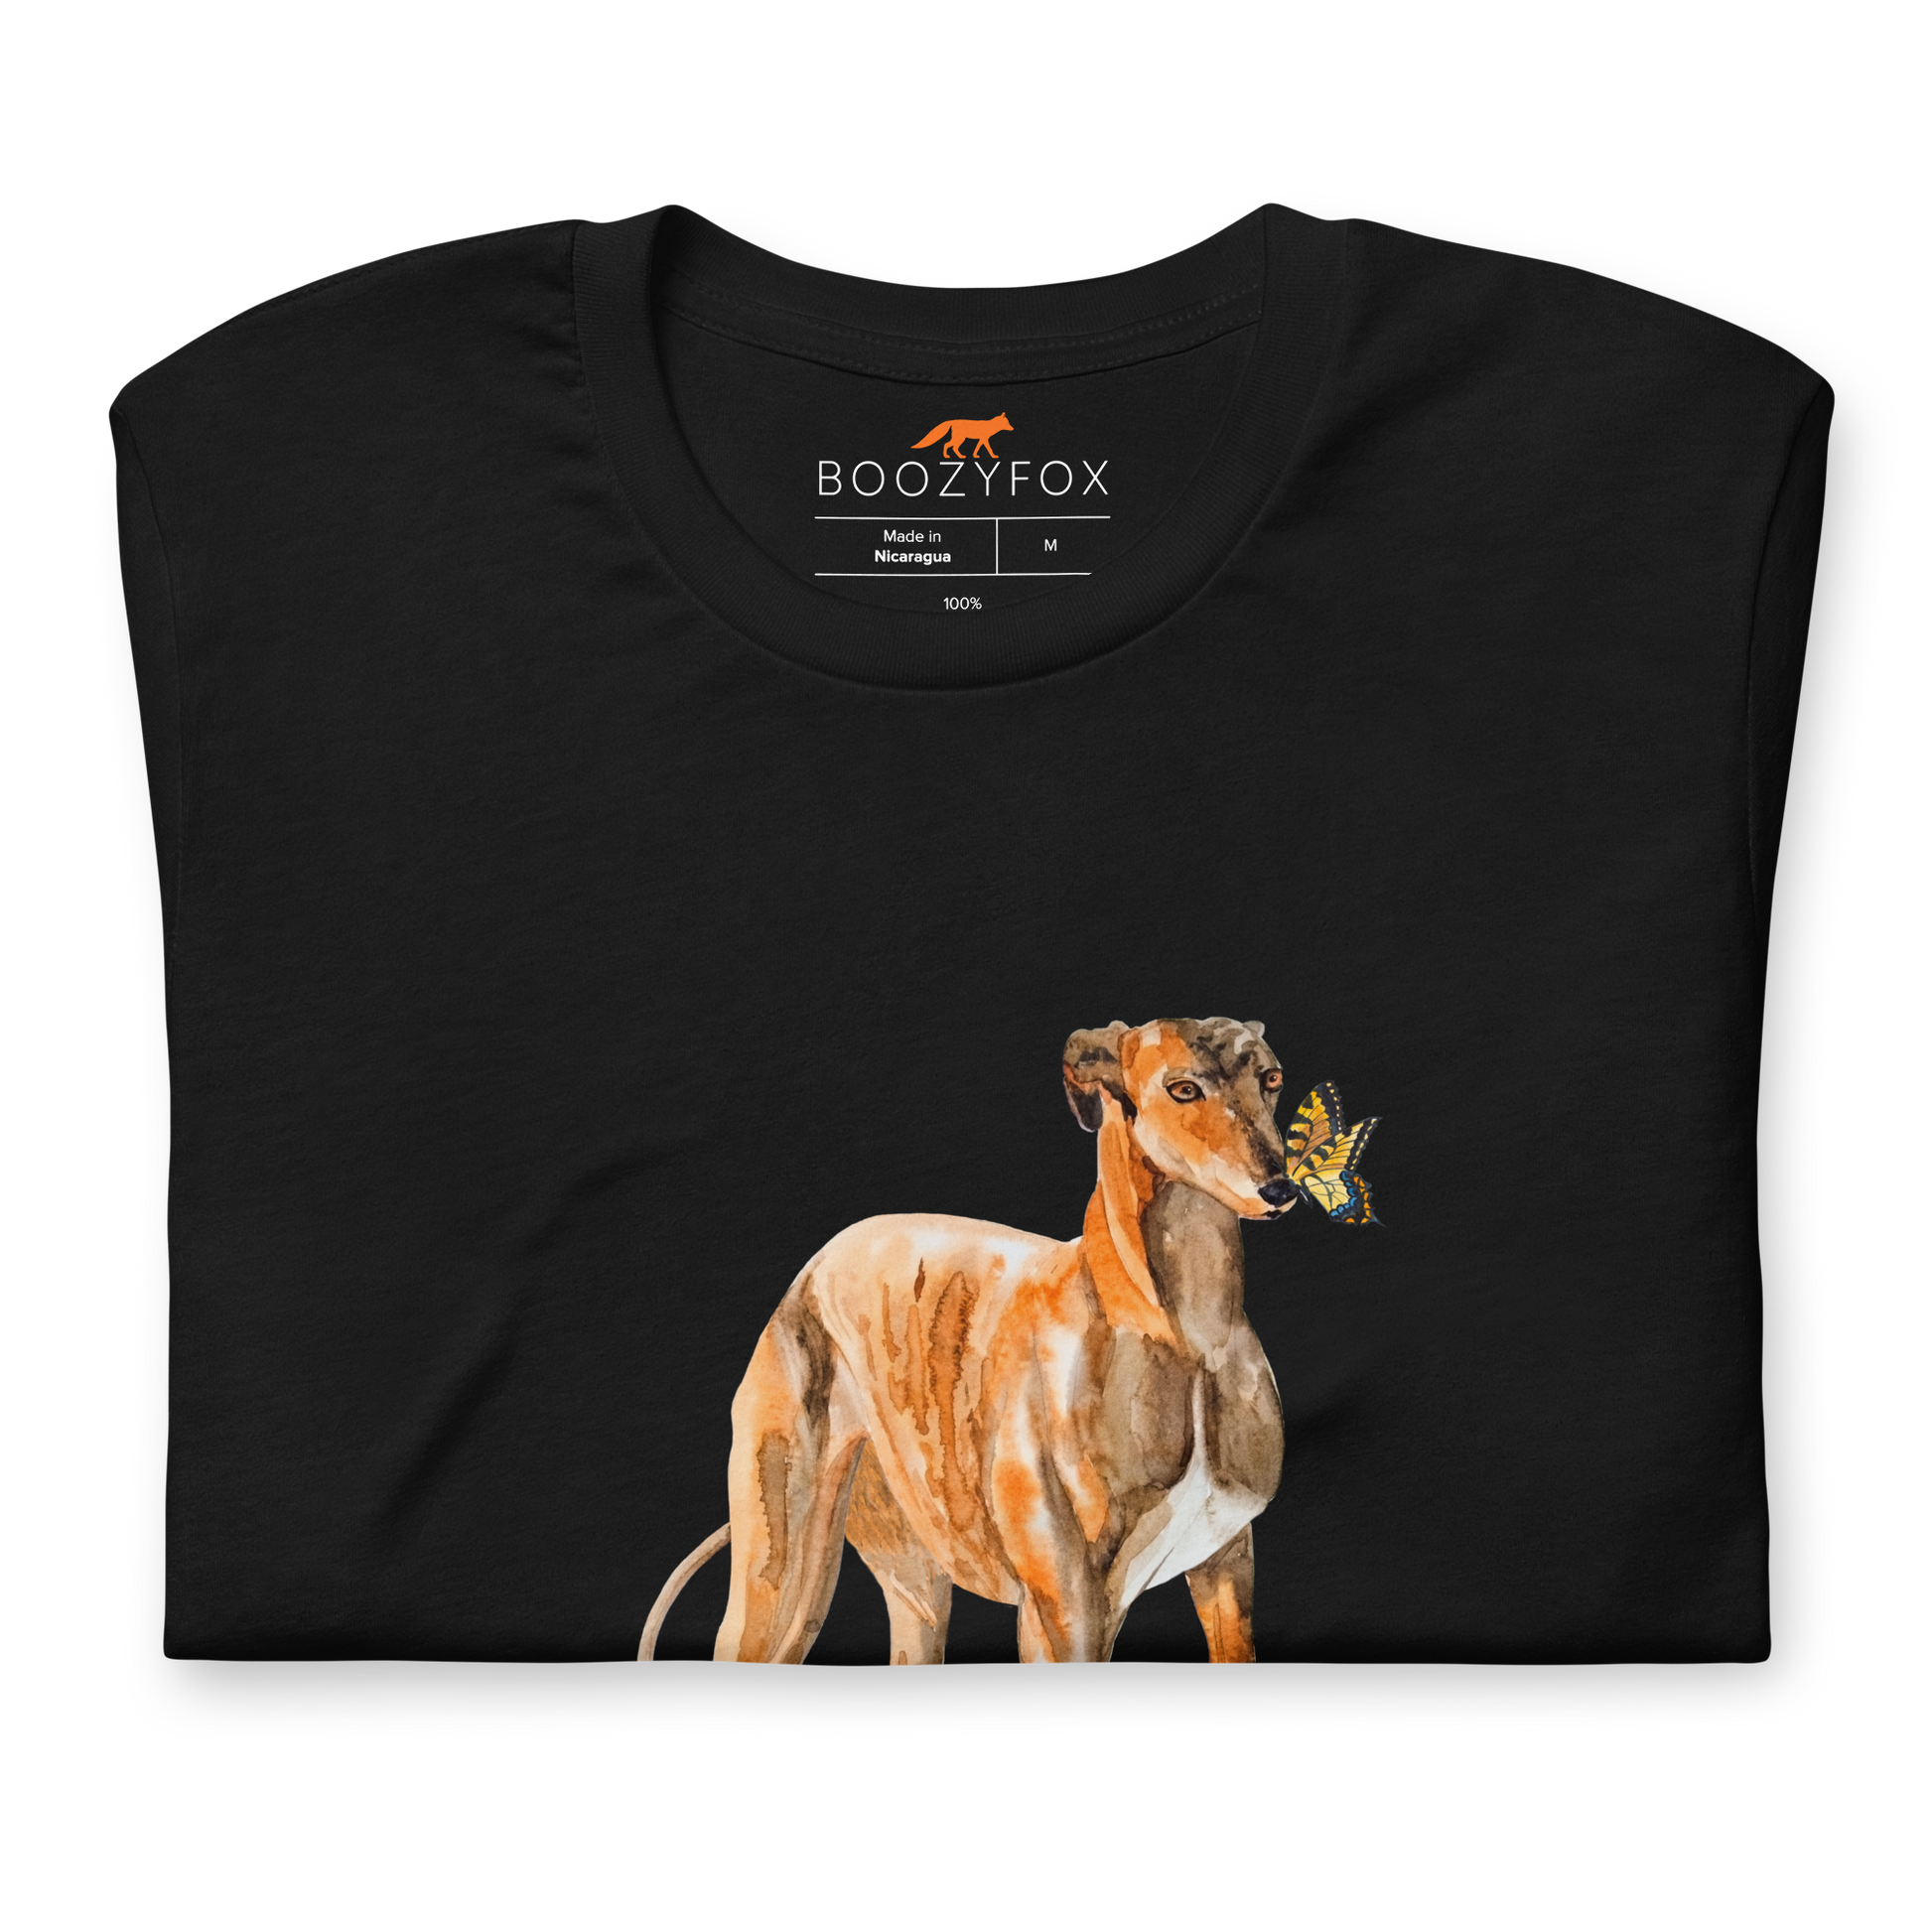 Front Details of a Black Premium Greyhound T-Shirt featuring an adorable Greyhound And Butterfly graphic on the chest - Cute Graphic Greyhound Tees - Boozy Fox